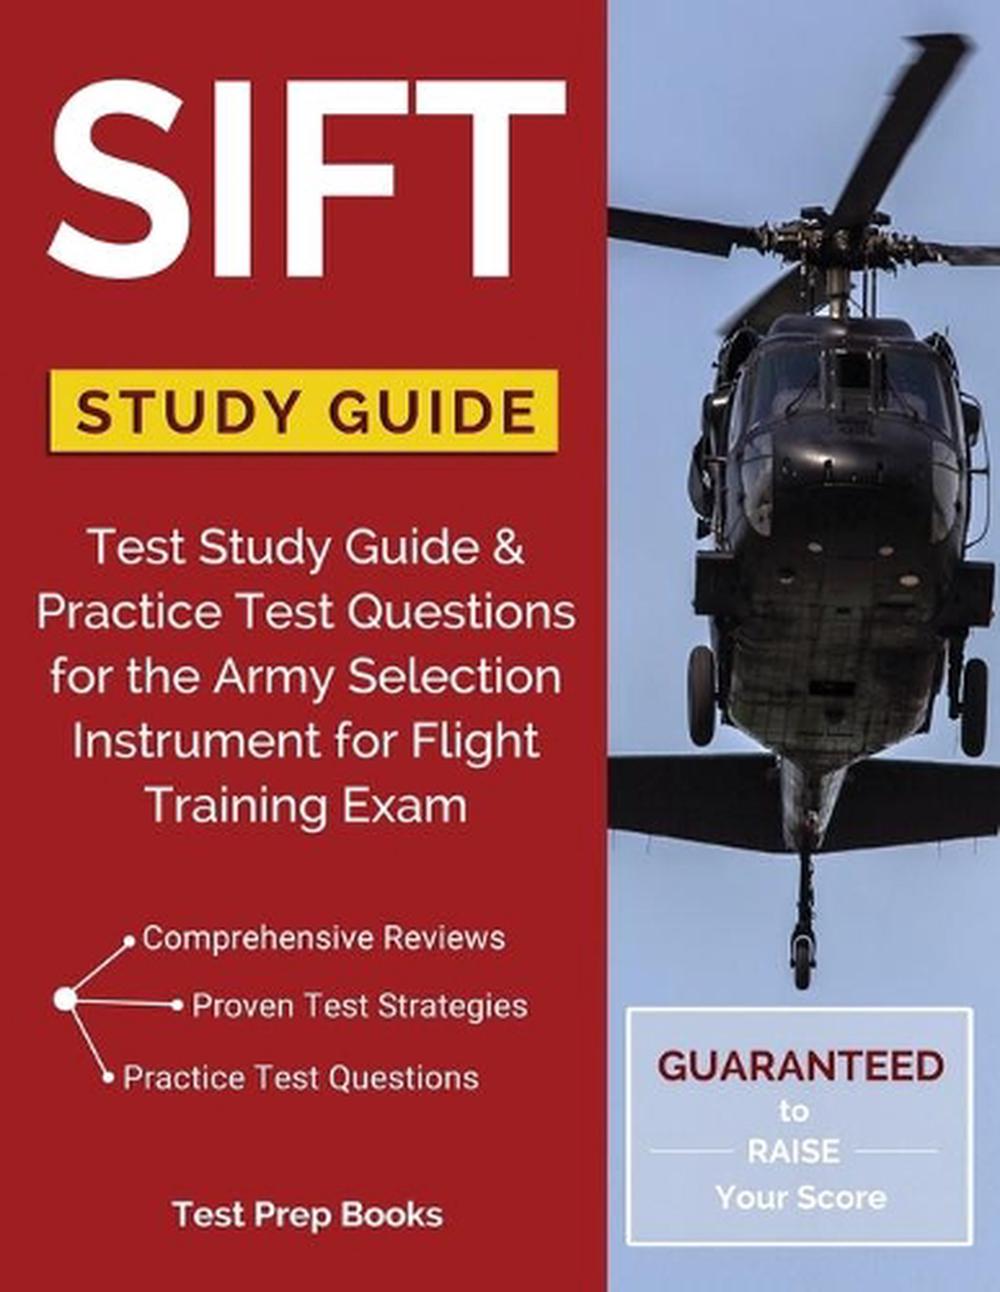 sift-study-guide-test-study-guide-practice-test-questions-for-the-army-select-9781628454314